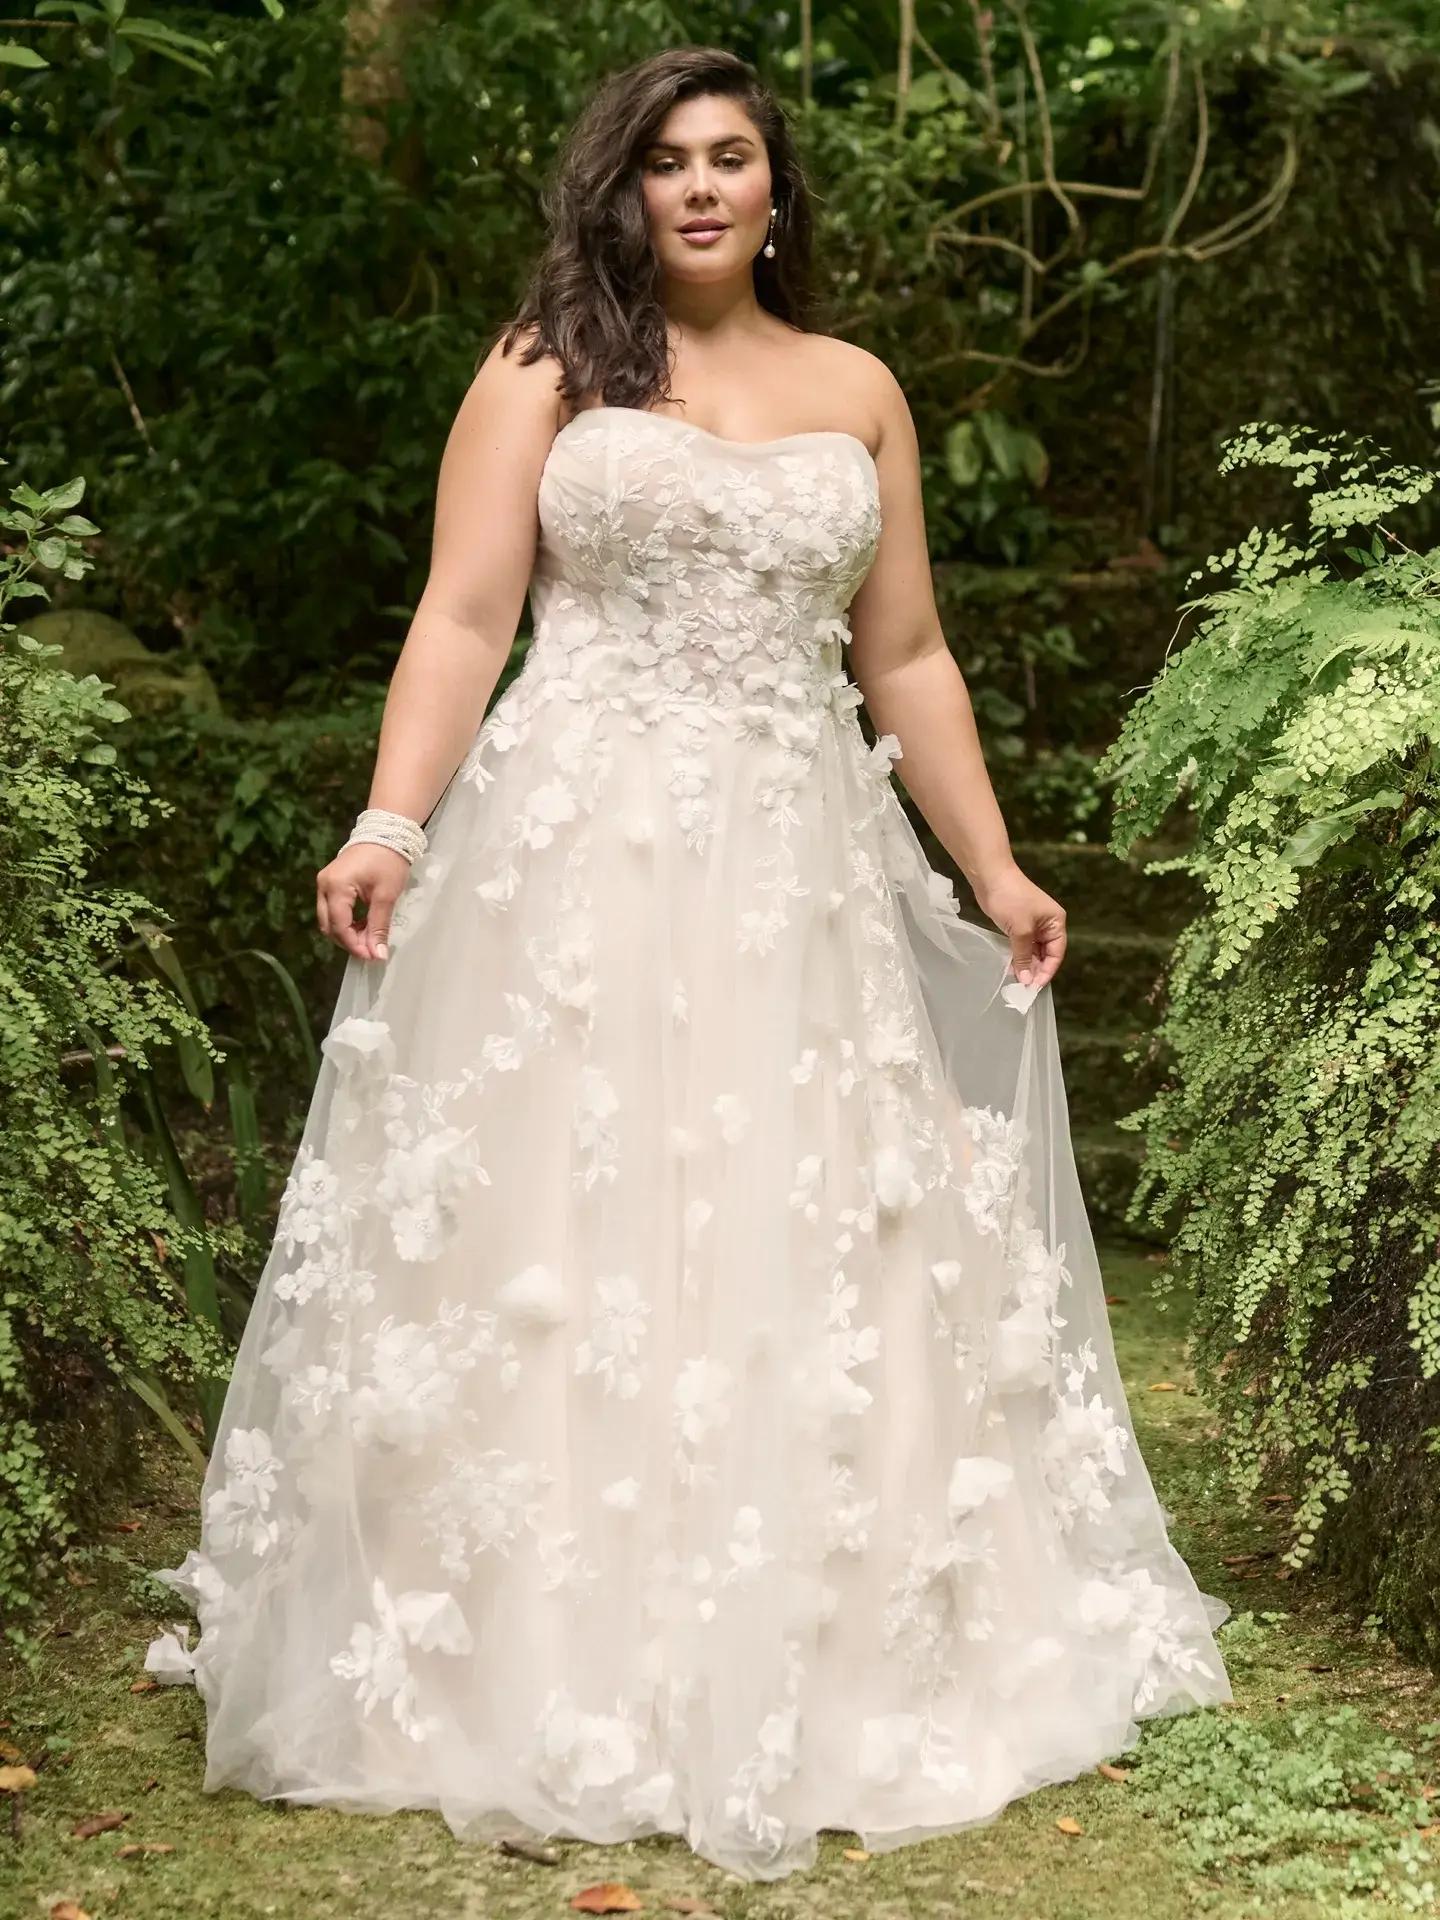 Plus Size Perfection: Finding a Flattering &amp; Fabulous Wedding Dress!